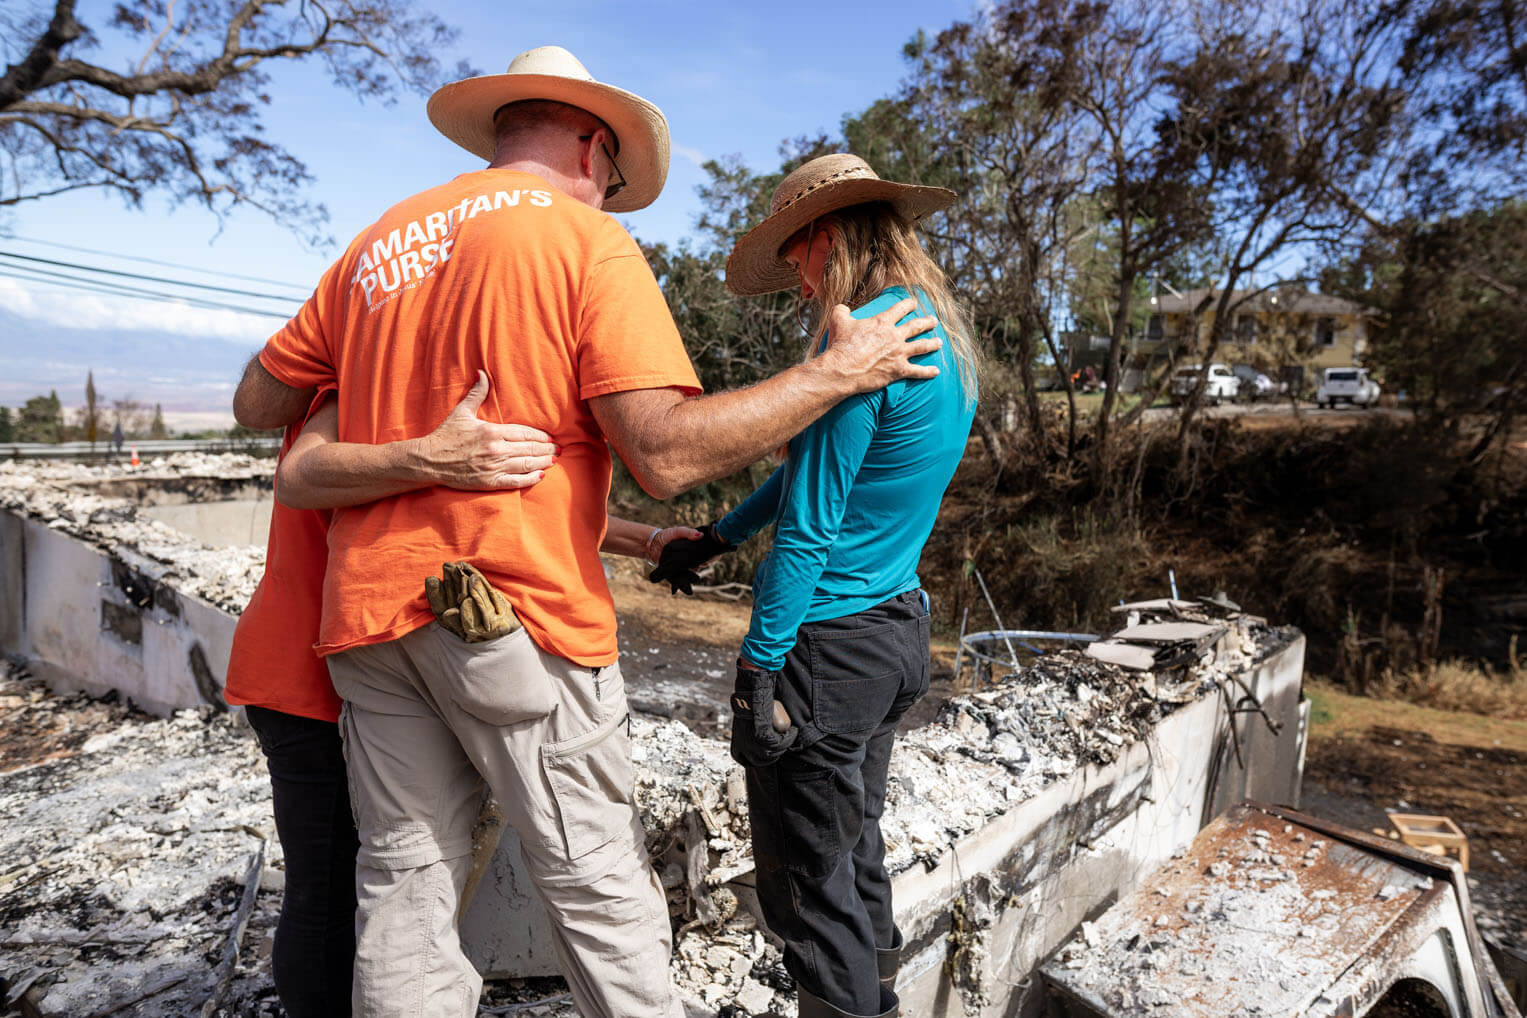 Volunteers prayed with a homeowner as they worked at her property.